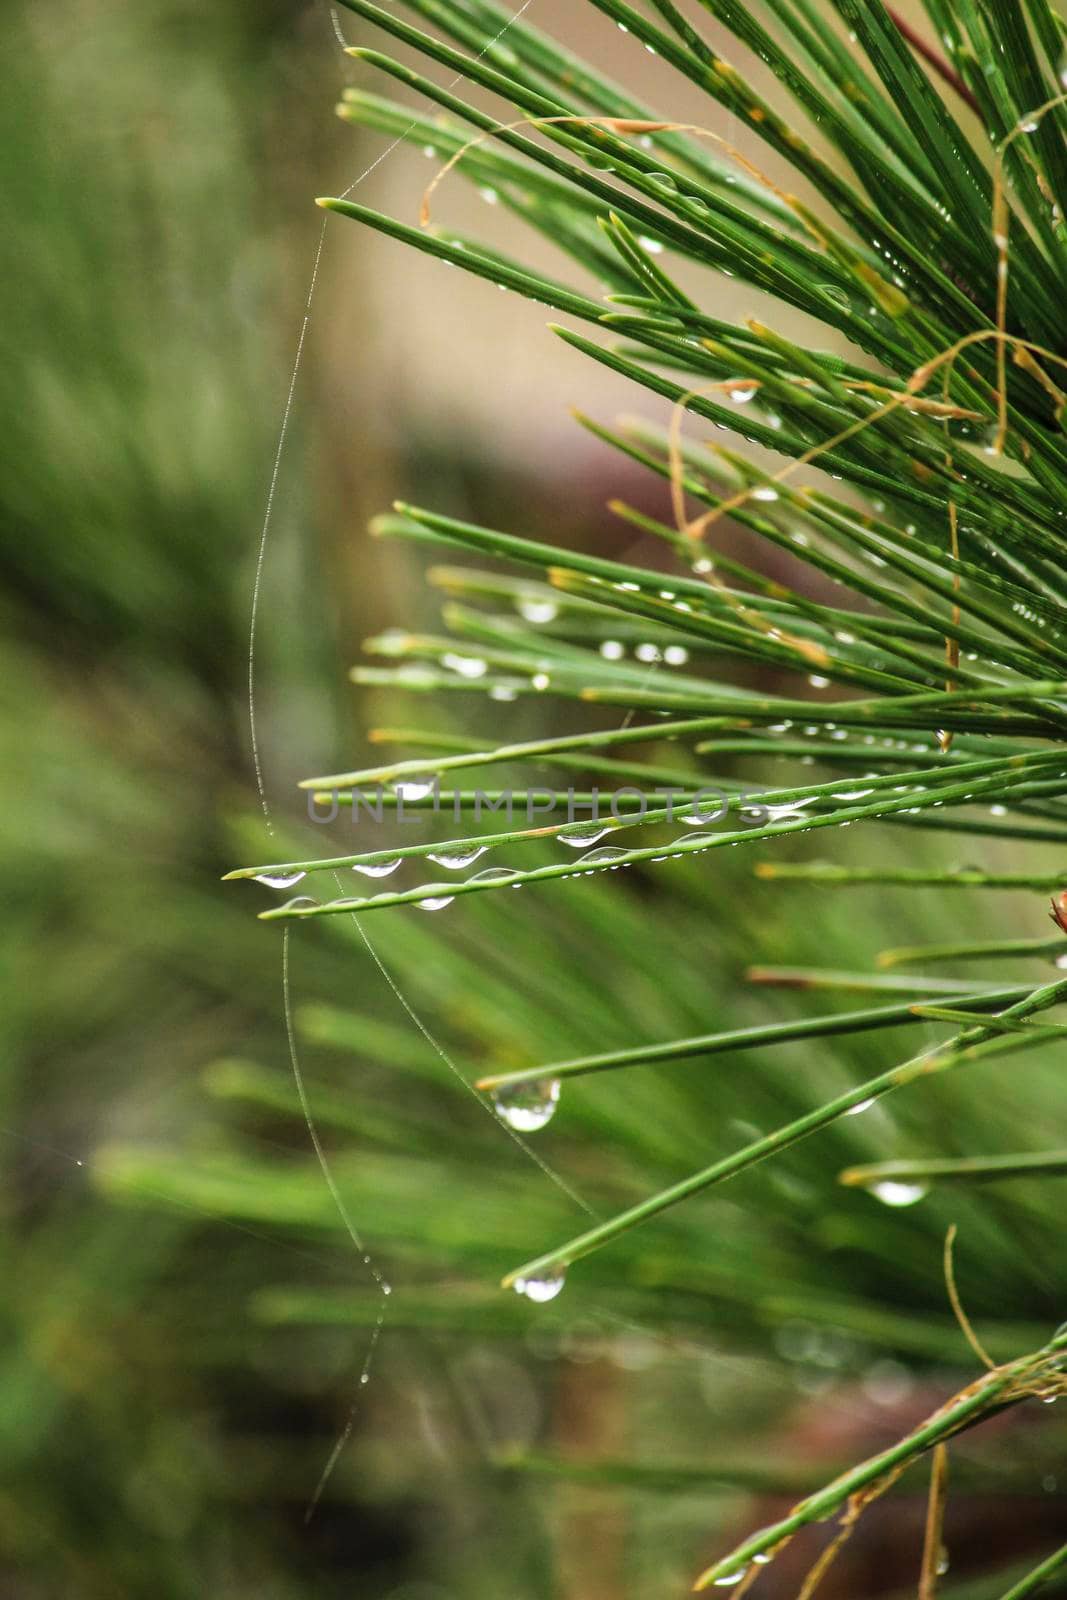 Pine needles with cobwebs and dew drops in the morning by soniabonet